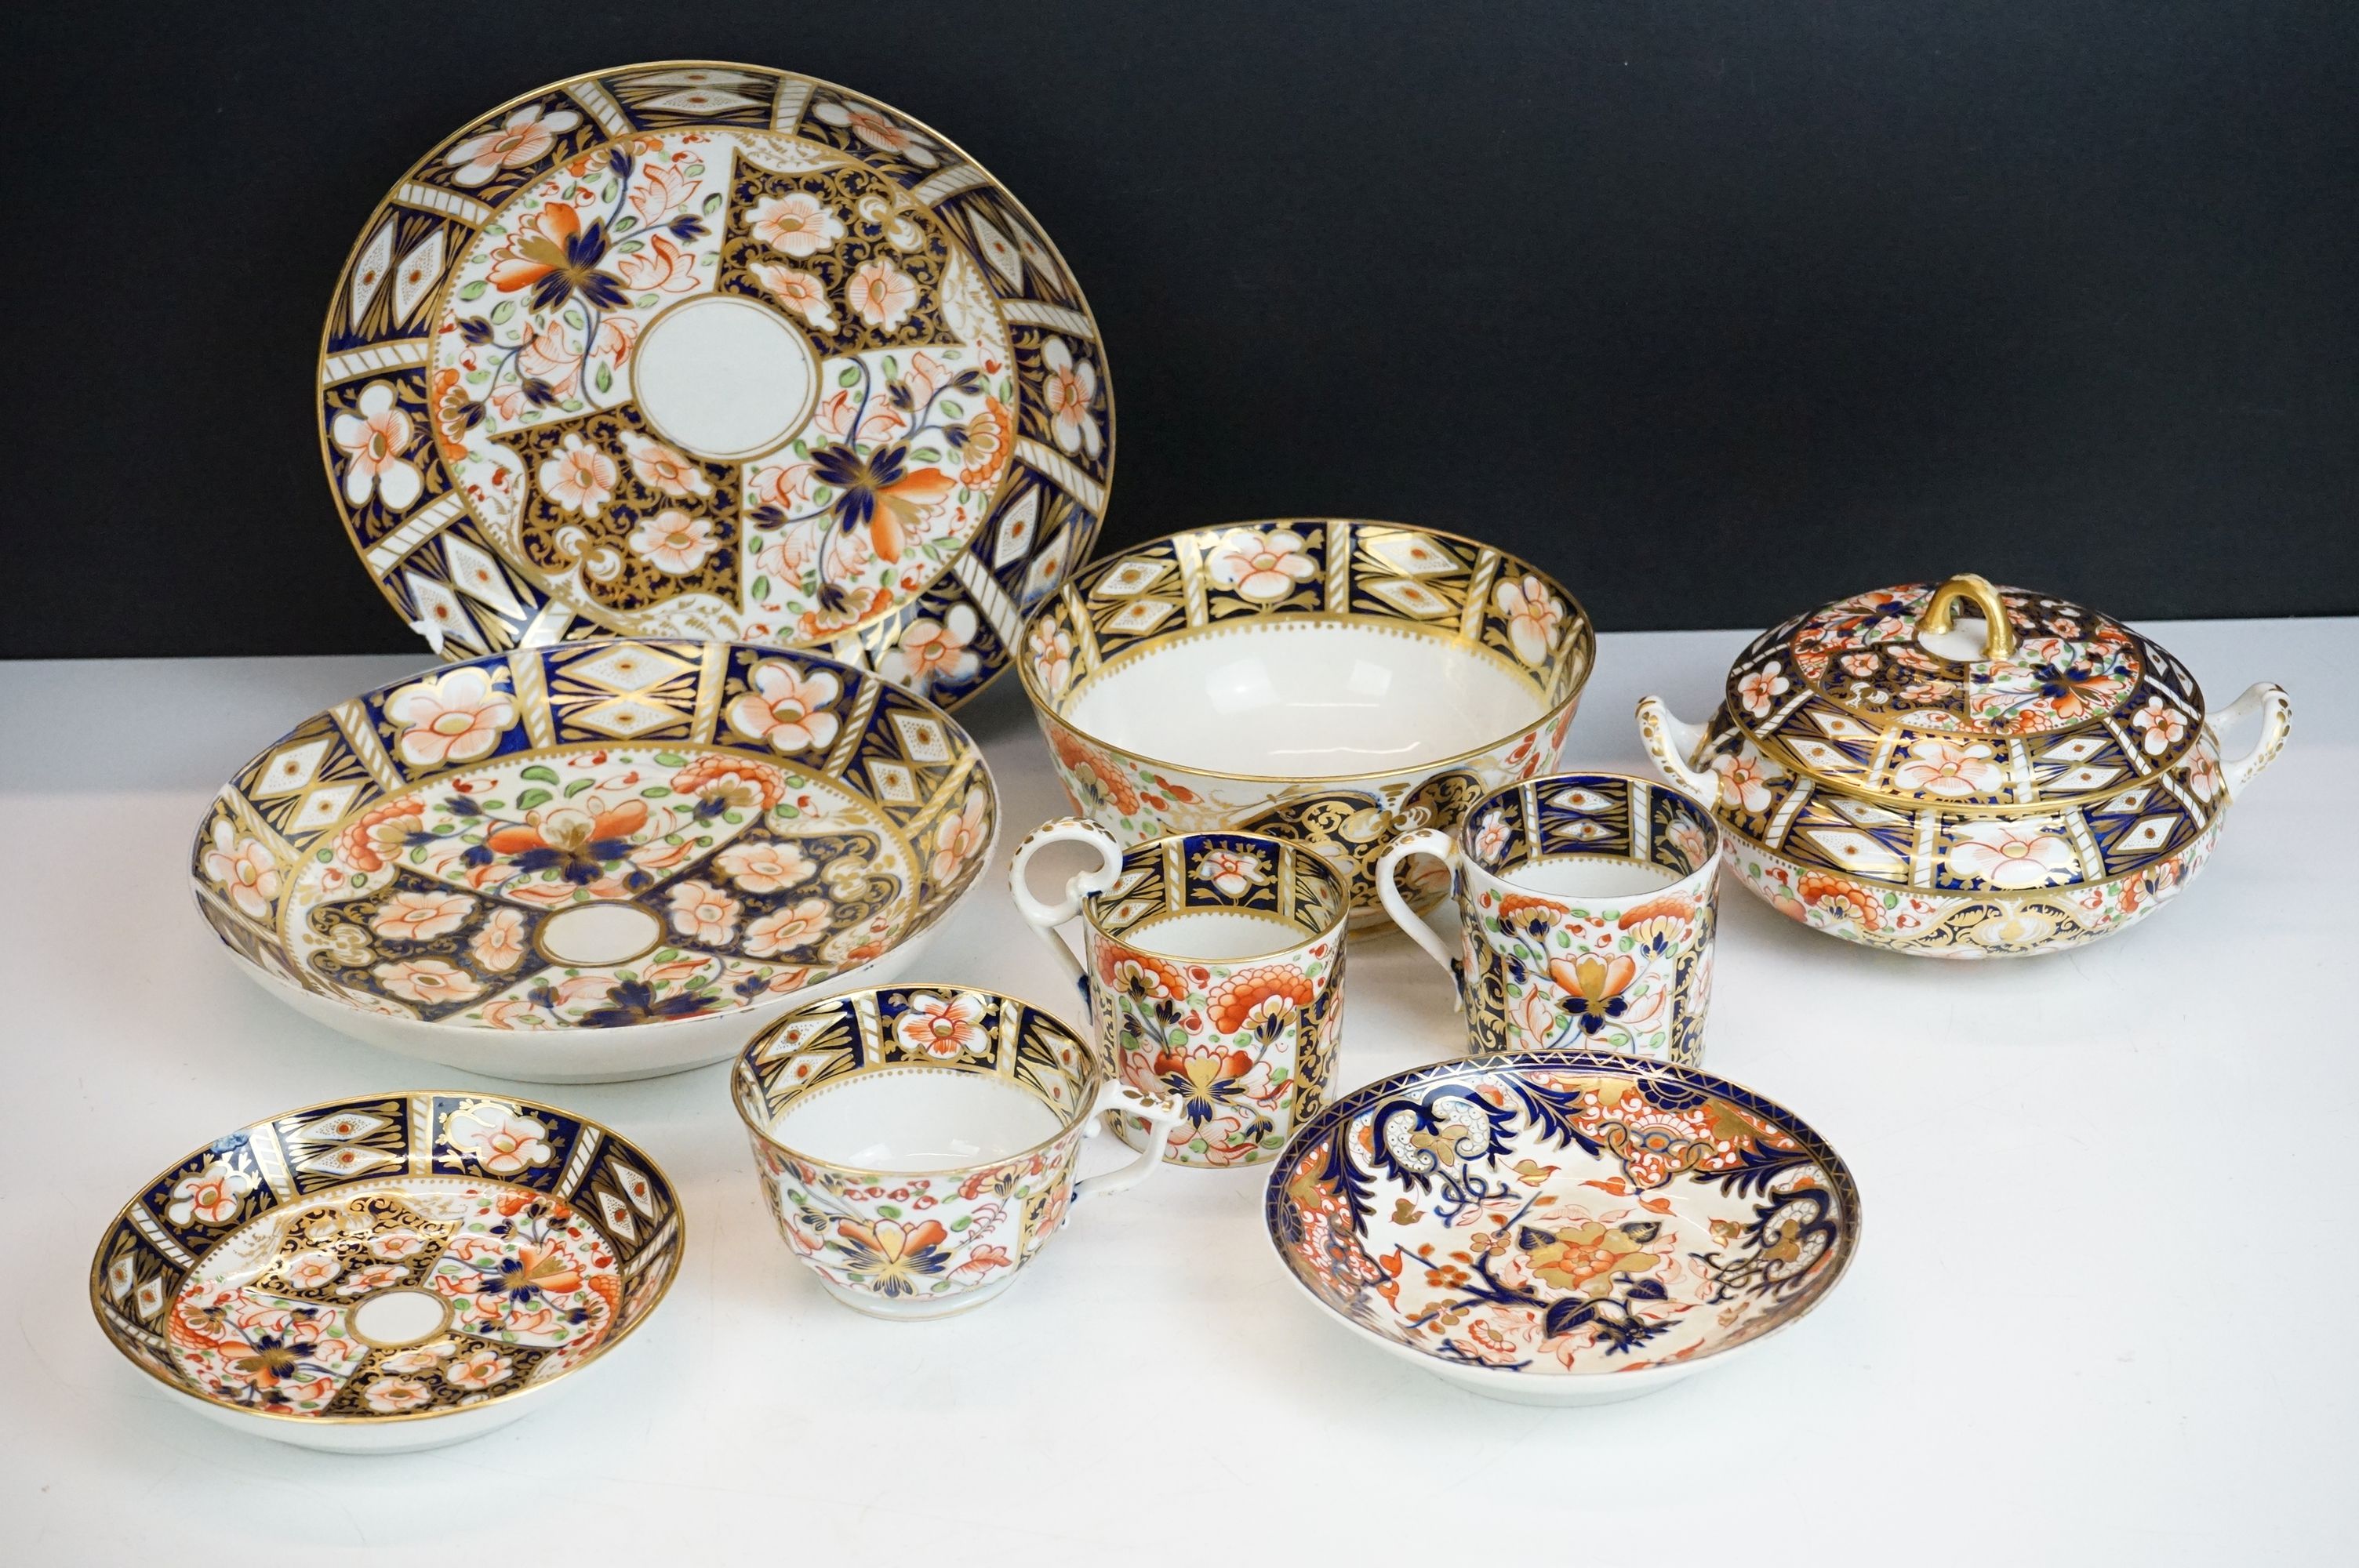 Early 19th century Crown Derby Imari pattern ceramics to include a small tureen & cover, teacups,